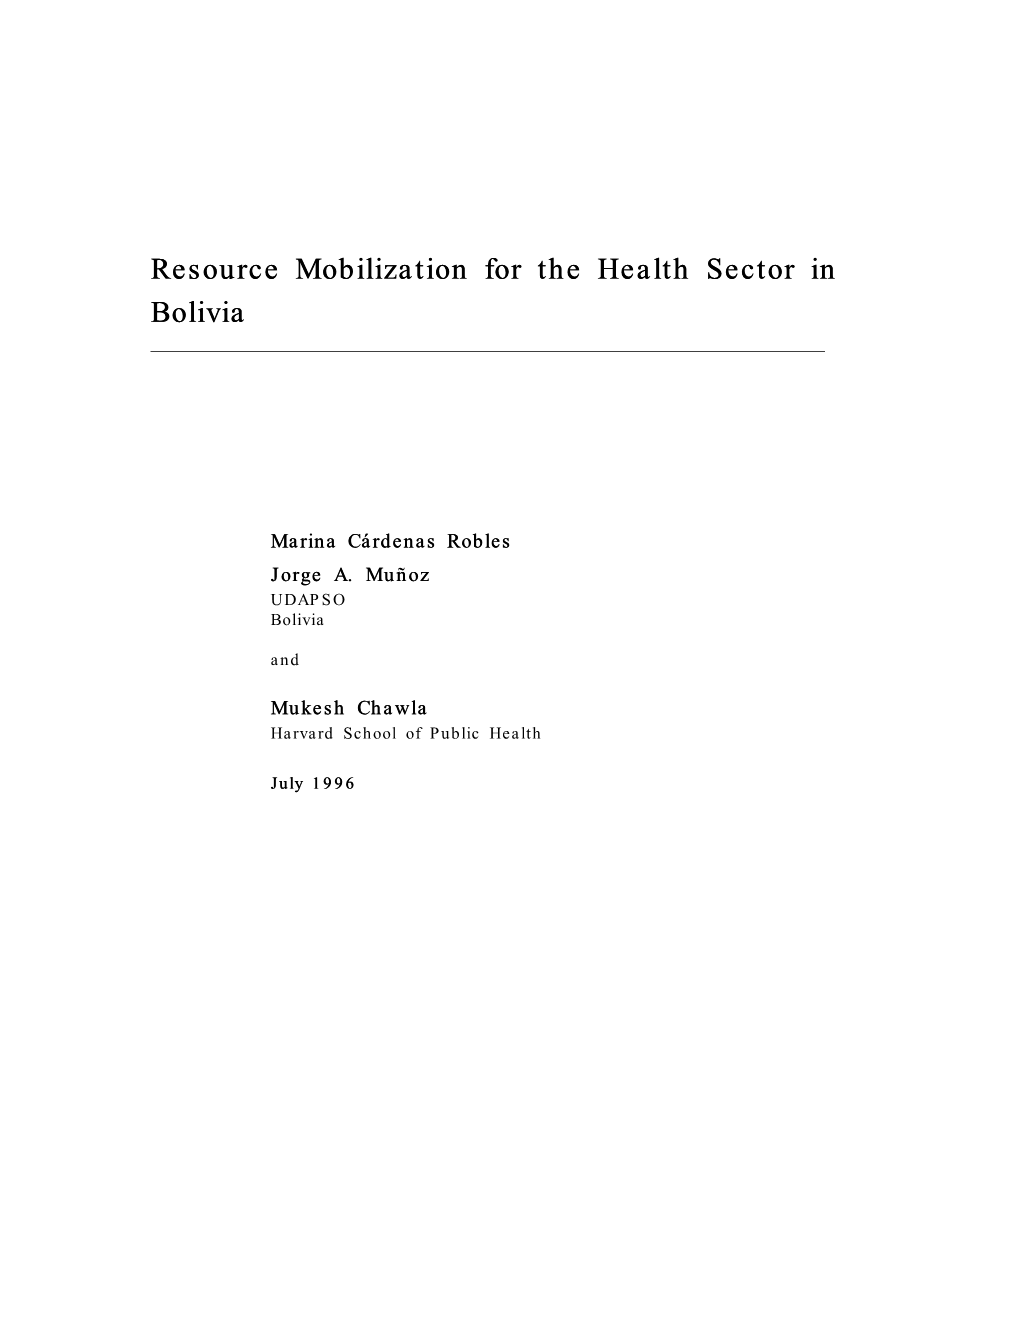 Resource Mobilization for the Health Sector in Bolivia